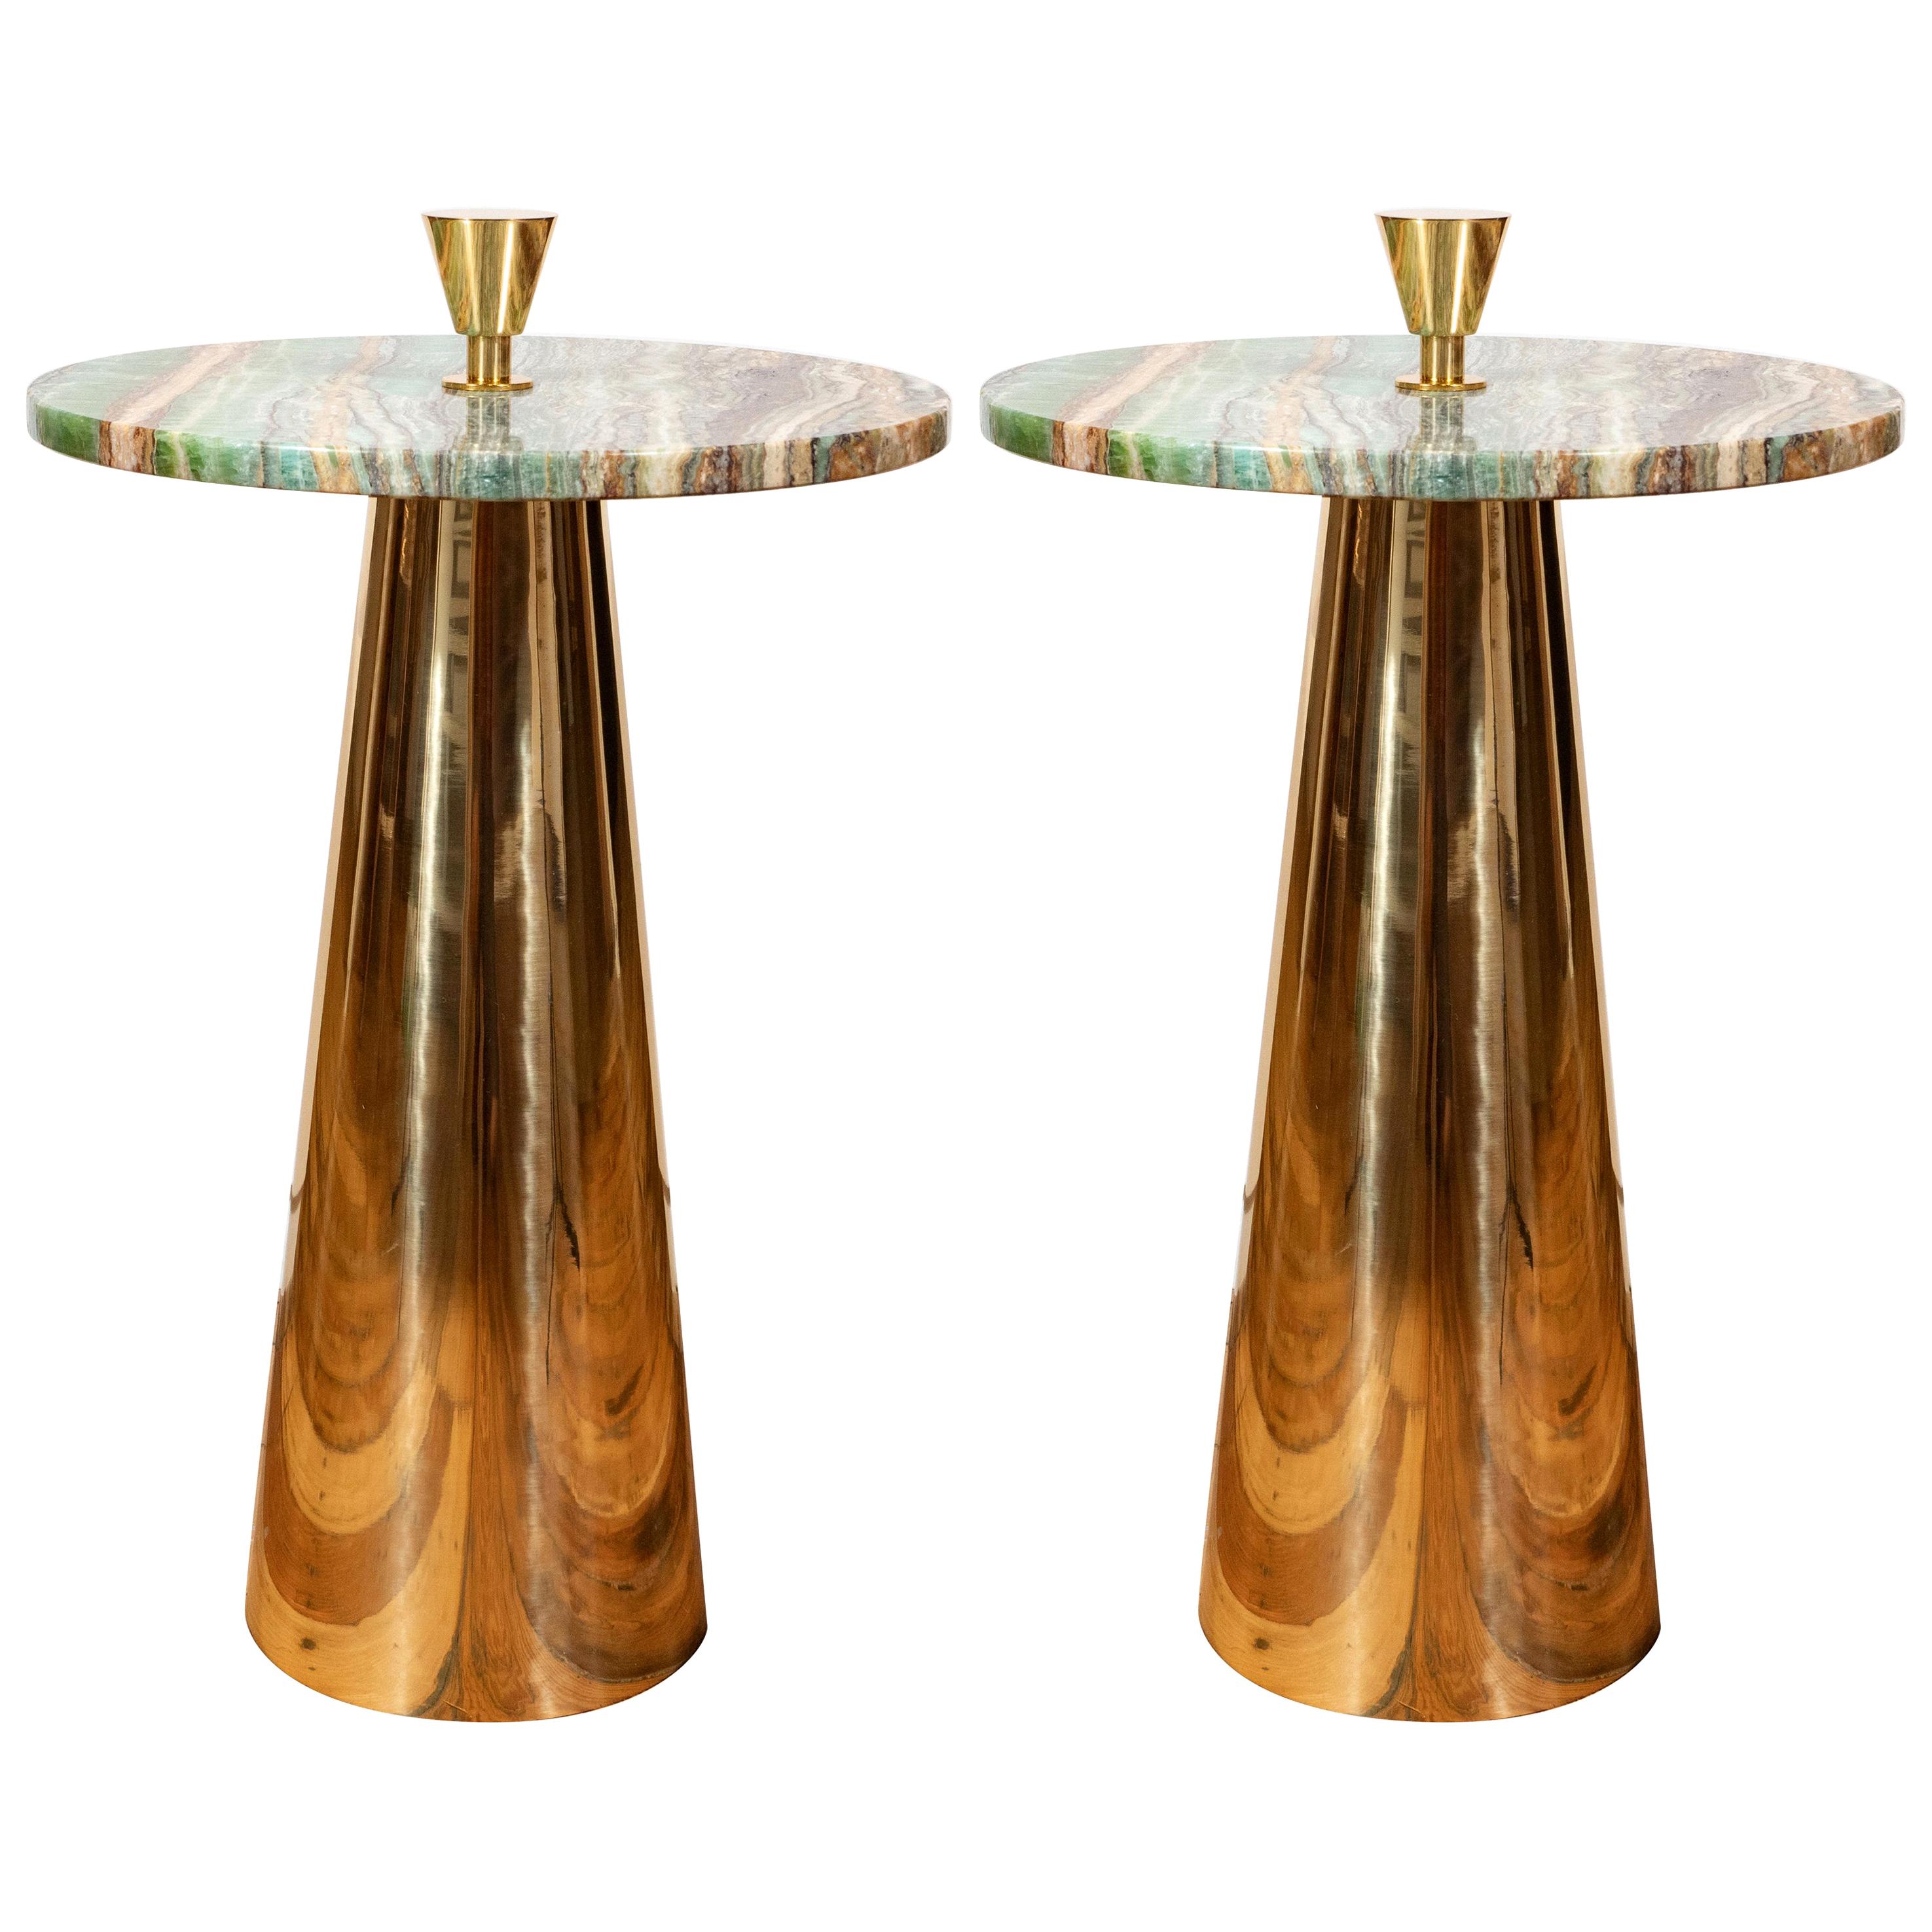 Pair of Round Emerald Green Onyx Marble and Brass Side or Martini Tables, Italy